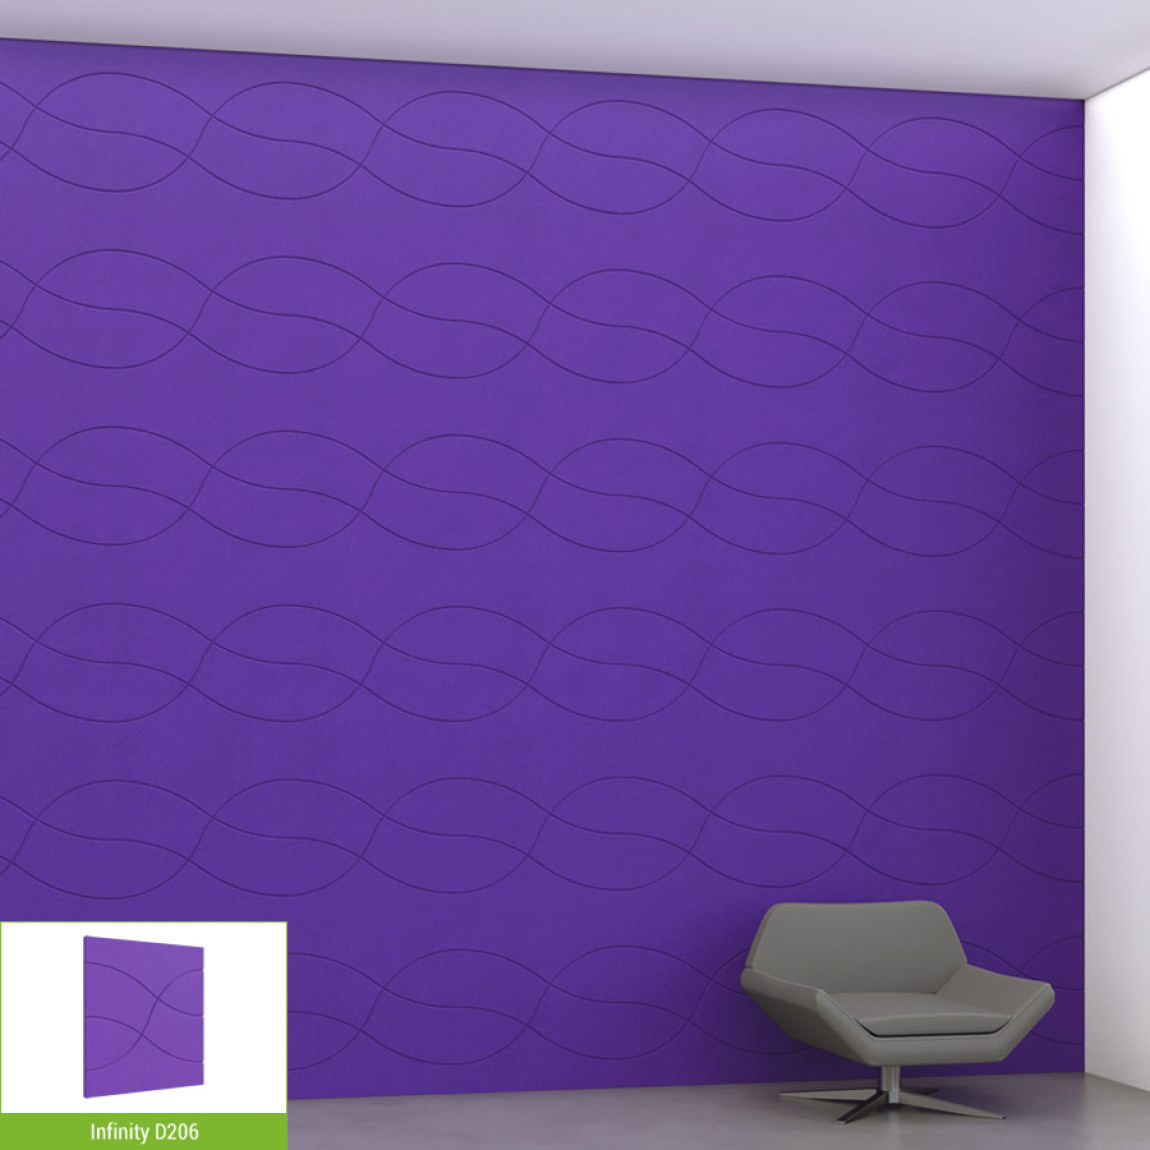 Sound Absorbent Acoustic Wall Tiles